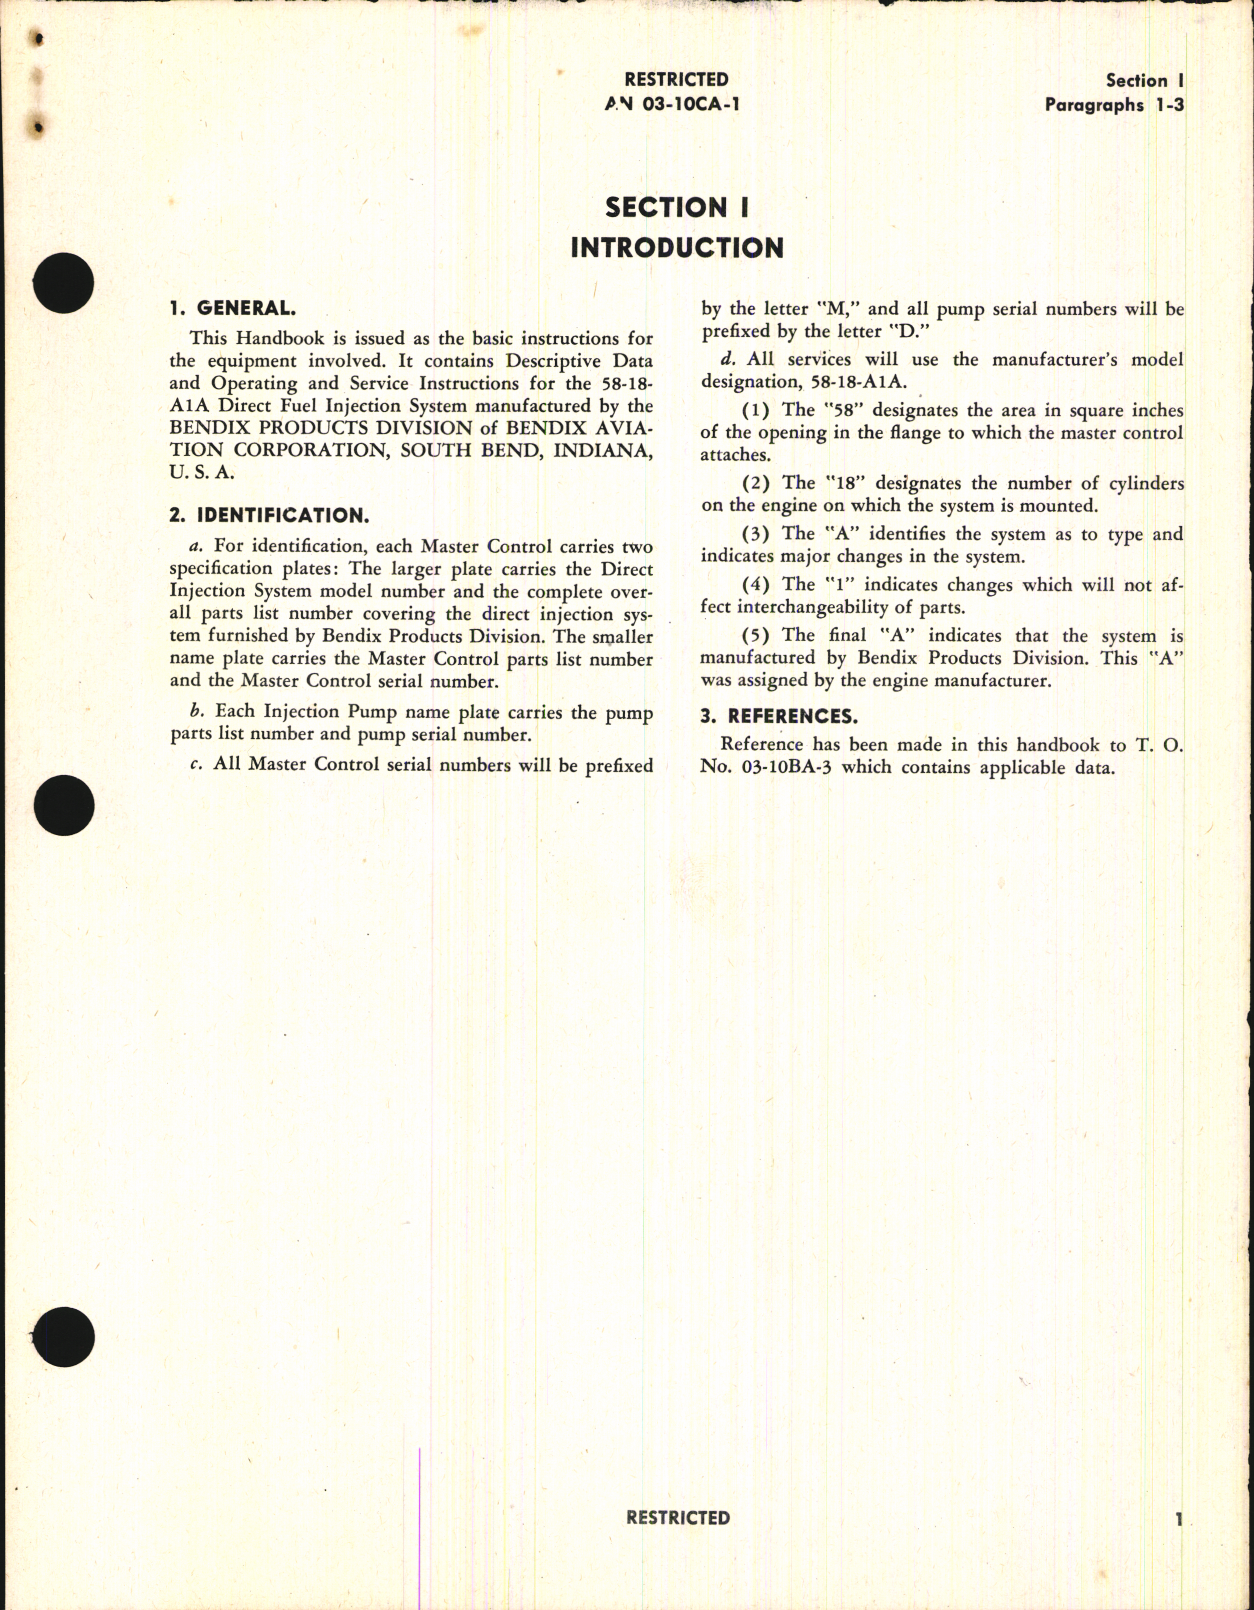 Sample page 5 from AirCorps Library document: Handbook of Instructions with Parts Catalog for Direct Fuel Injection System Model 58-18-A1A